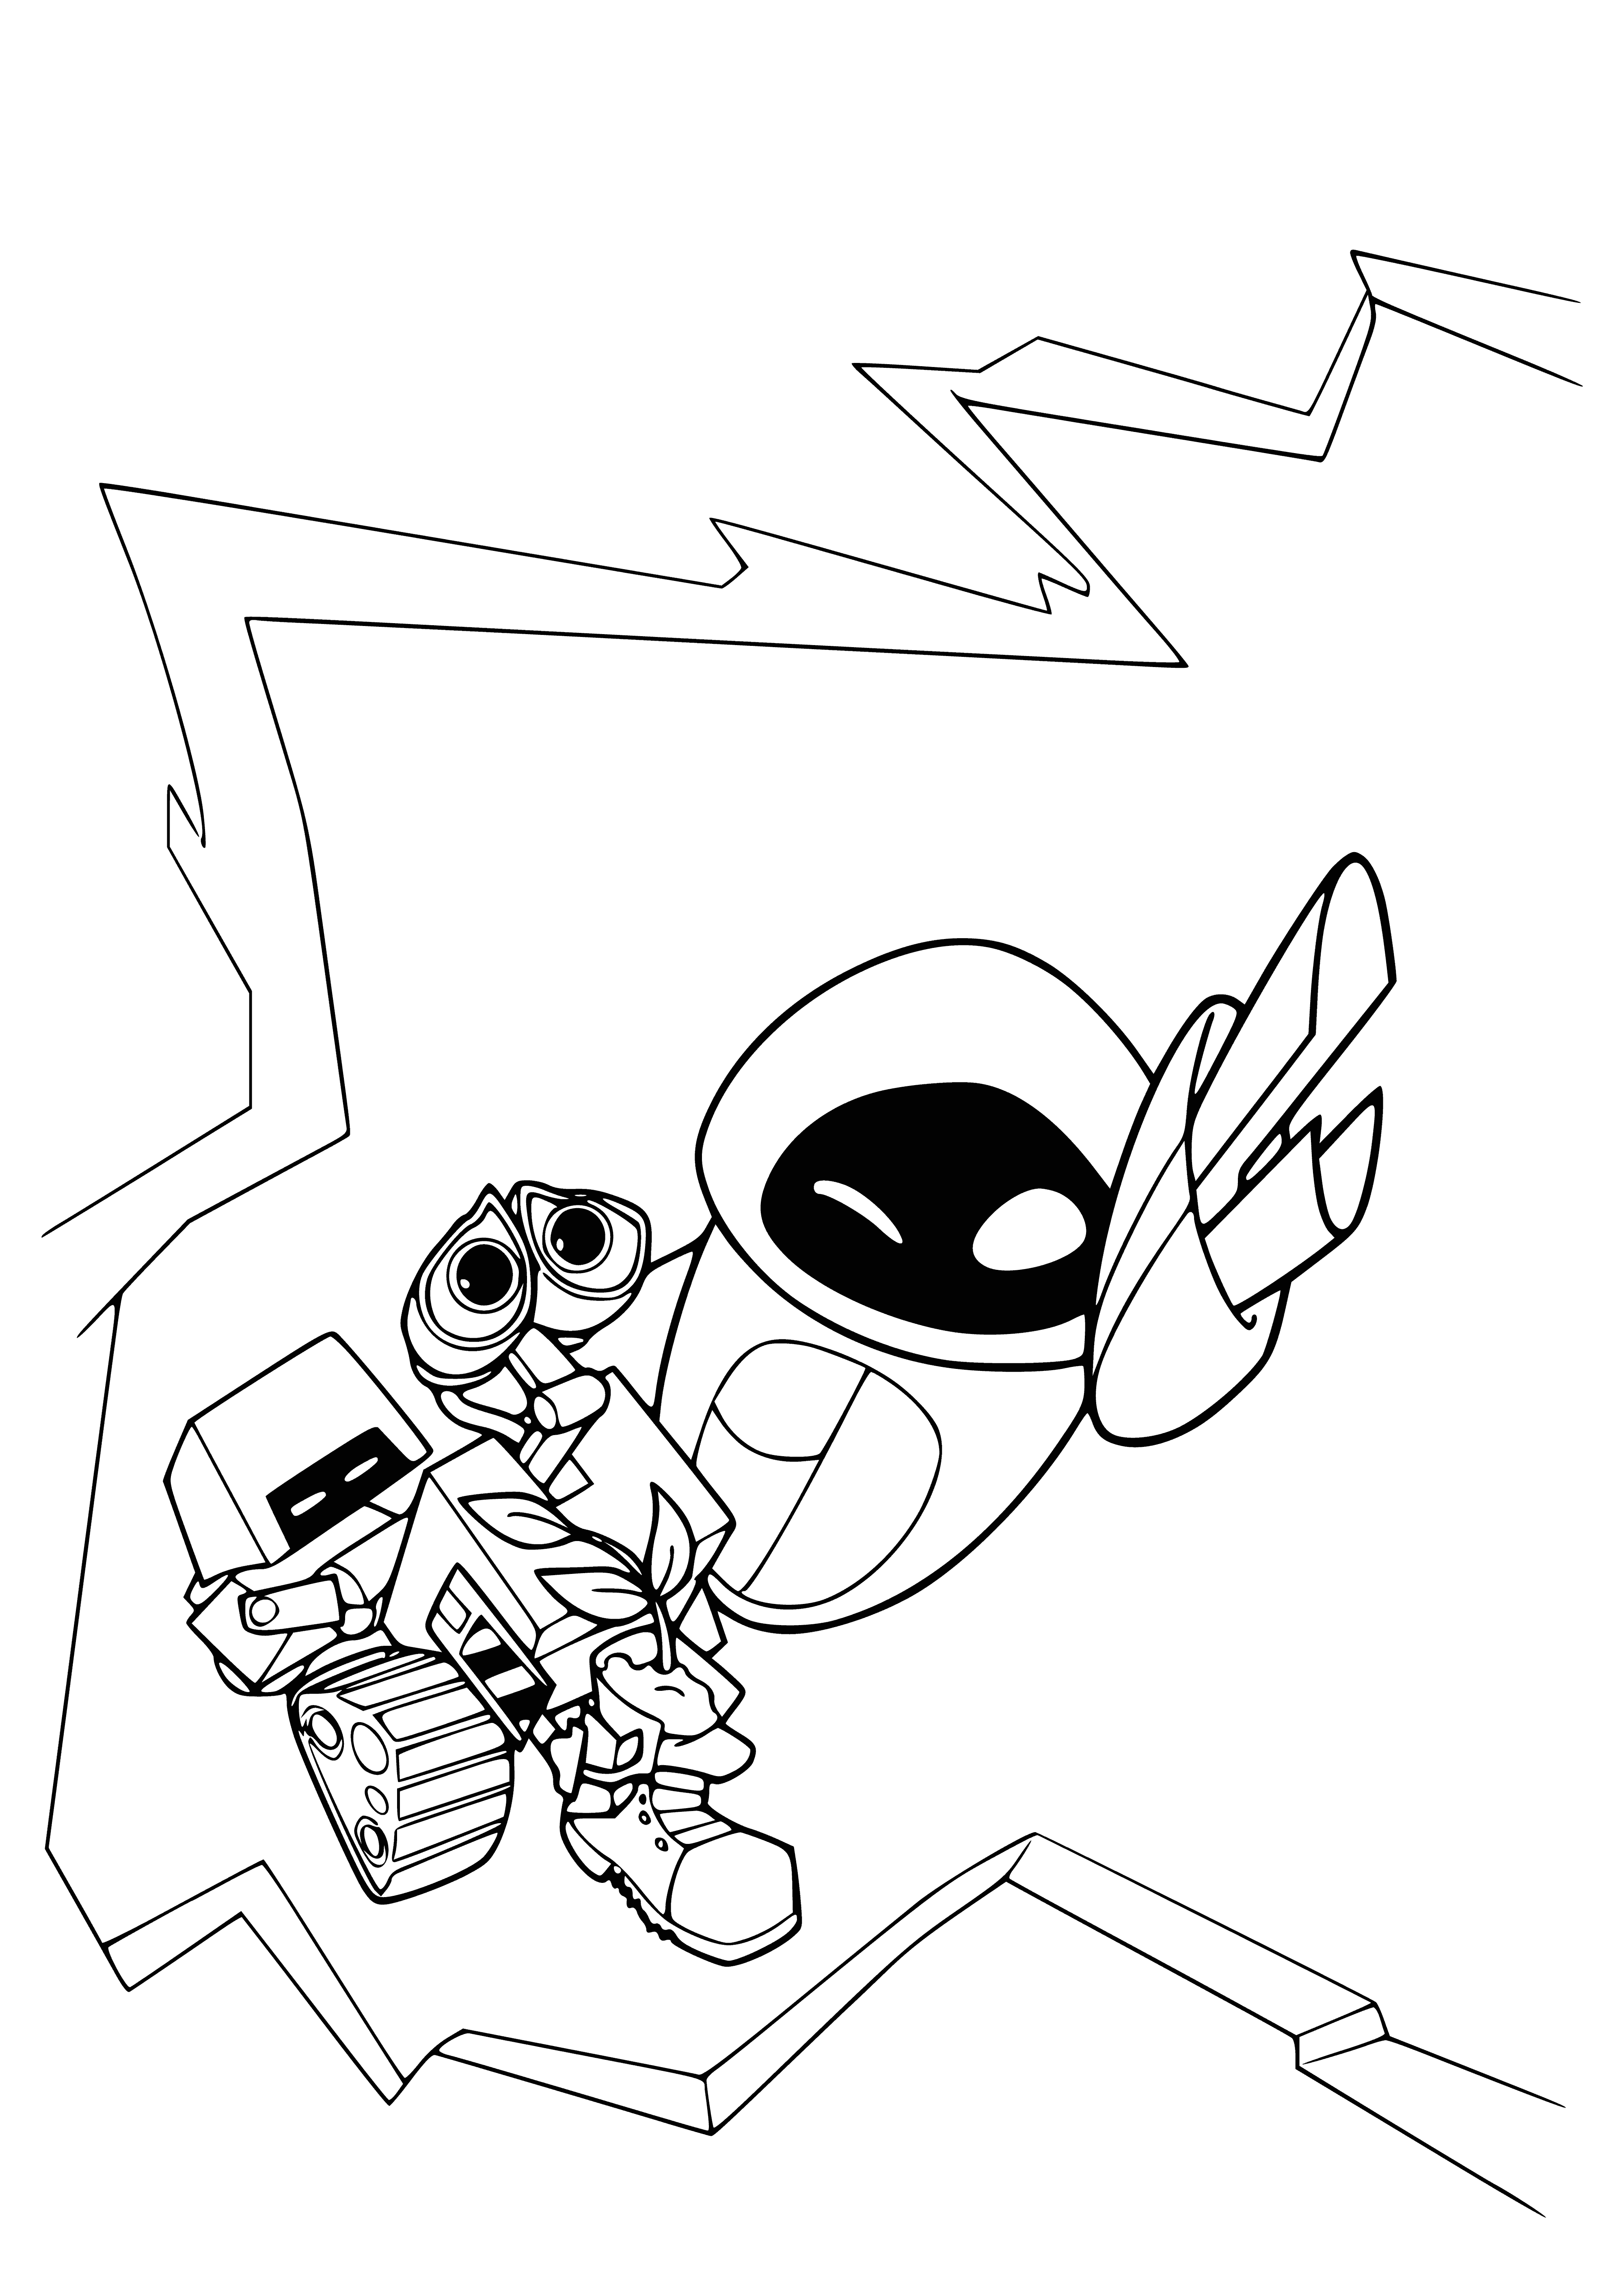 coloring page: Wall-e looks at the flower, captivated.

Wall-e and Eve bond over a flower, captivating them both.